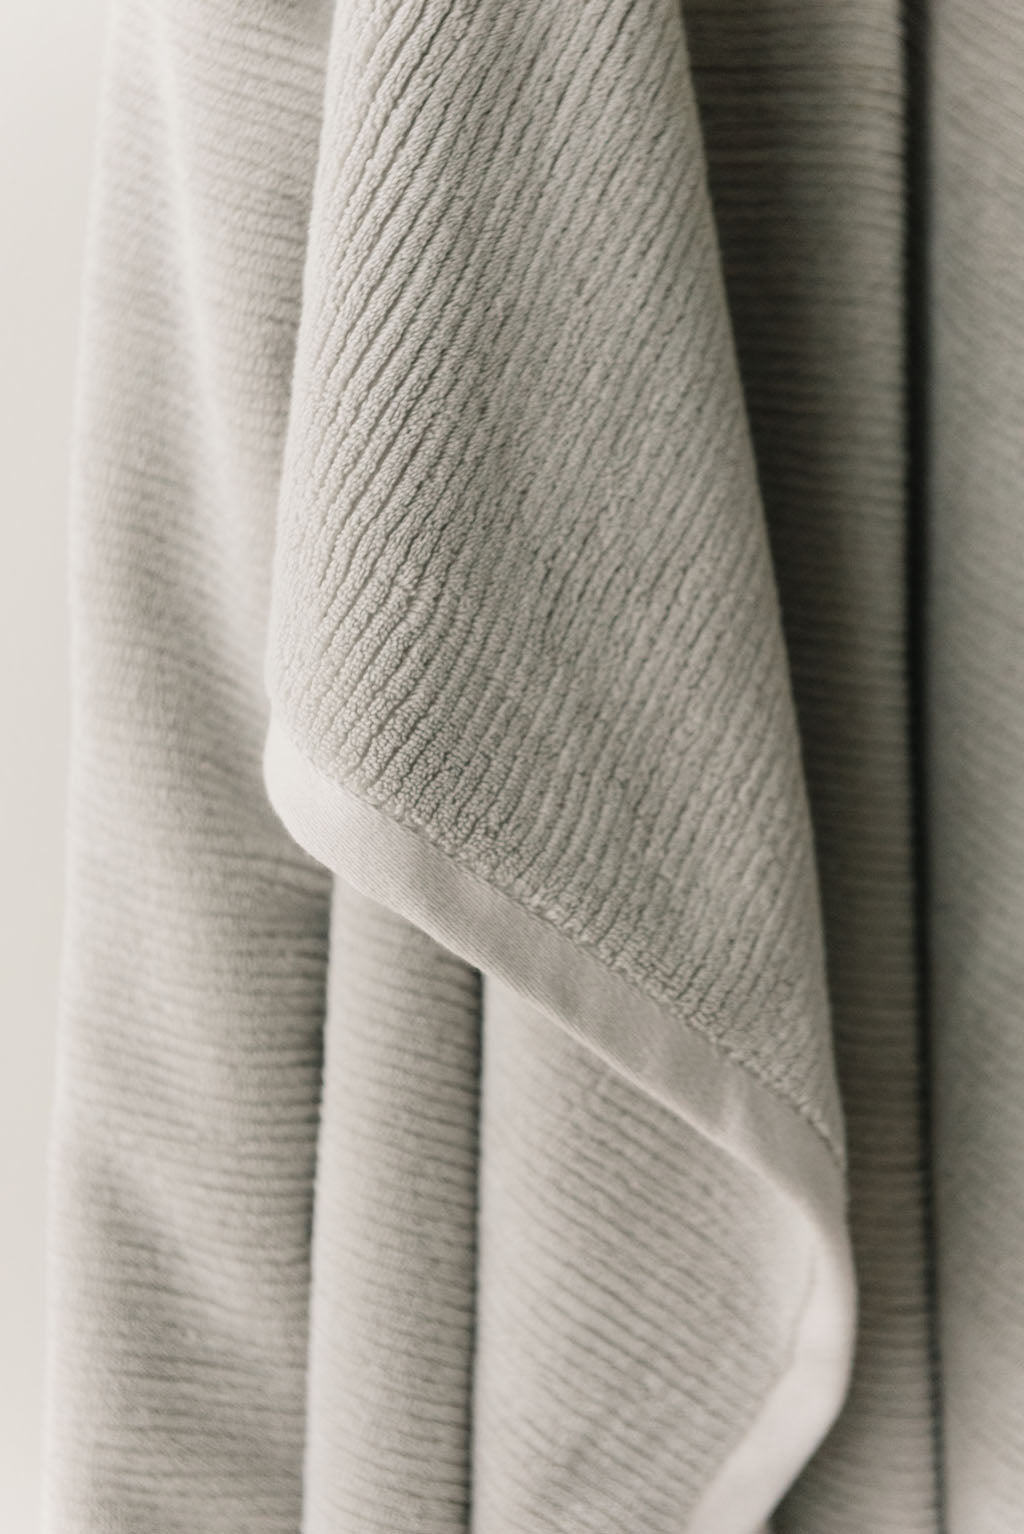 Ribbed Terry Bath Sheets in the color Light Grey. Photo of the towel is taken close up. 